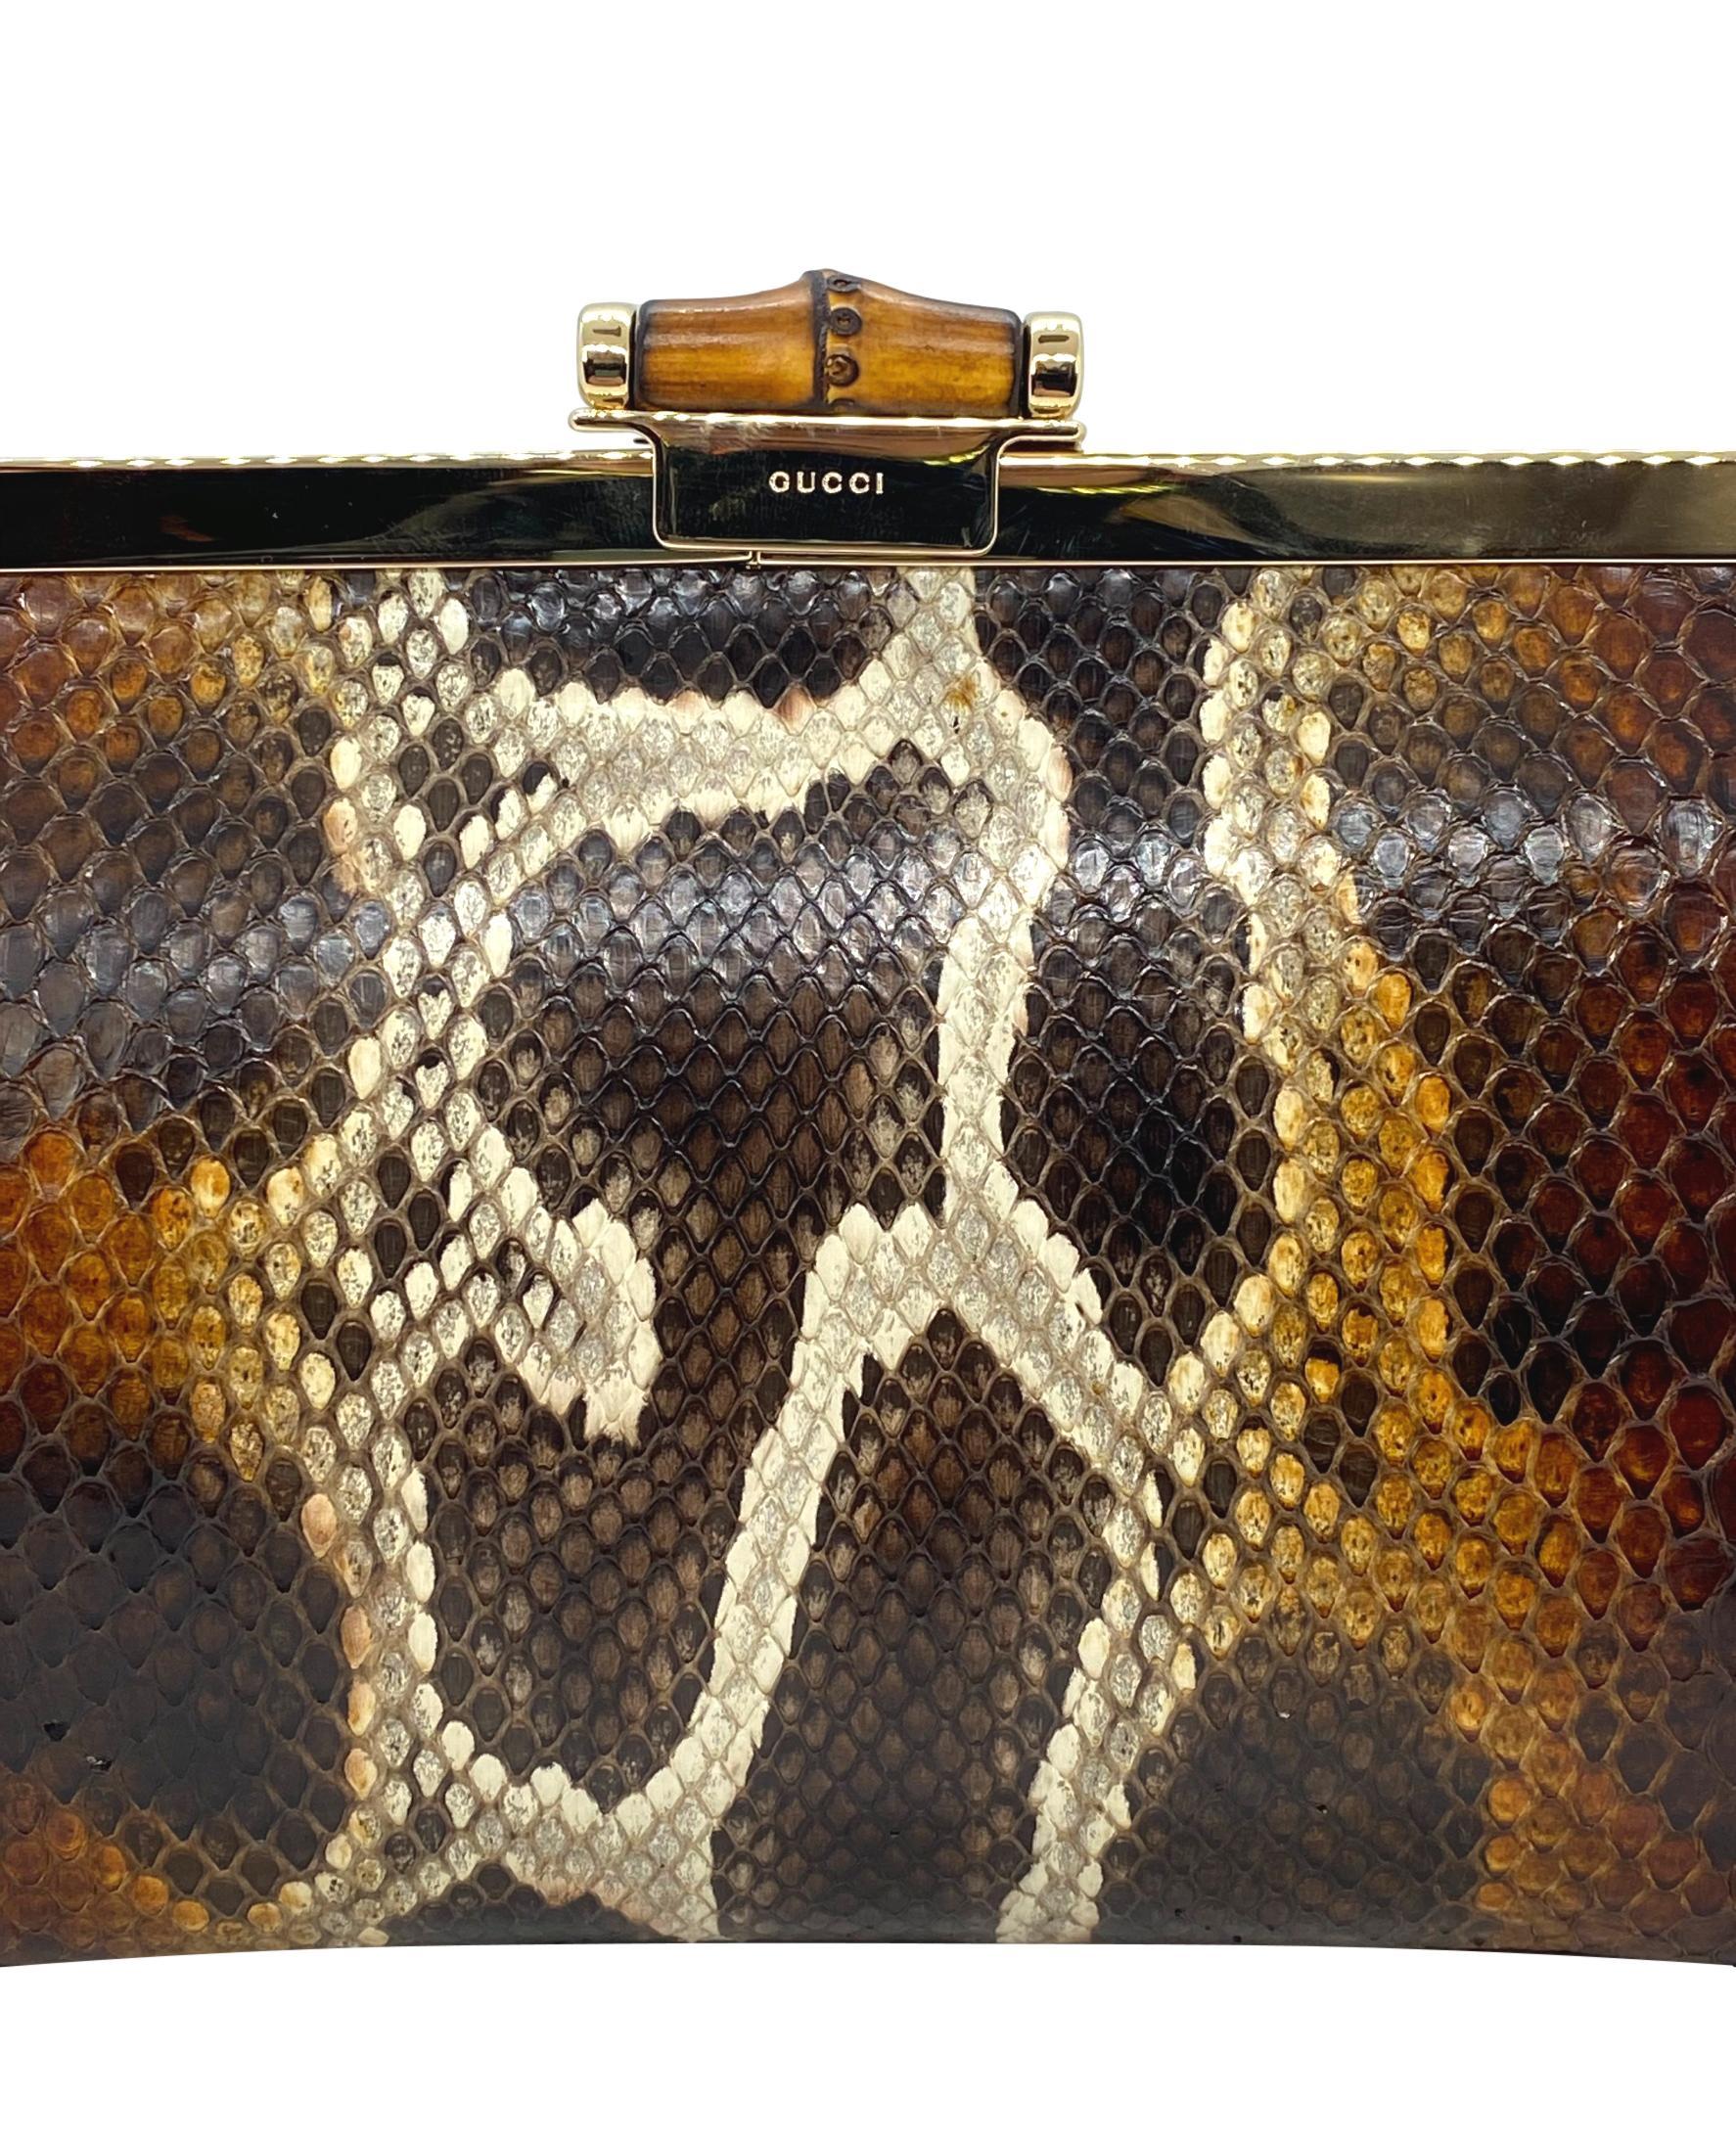 Limited Edition Gucci Tom Ford Python Minaudière Runway Frame Bag In Excellent Condition In Banner Elk, NC